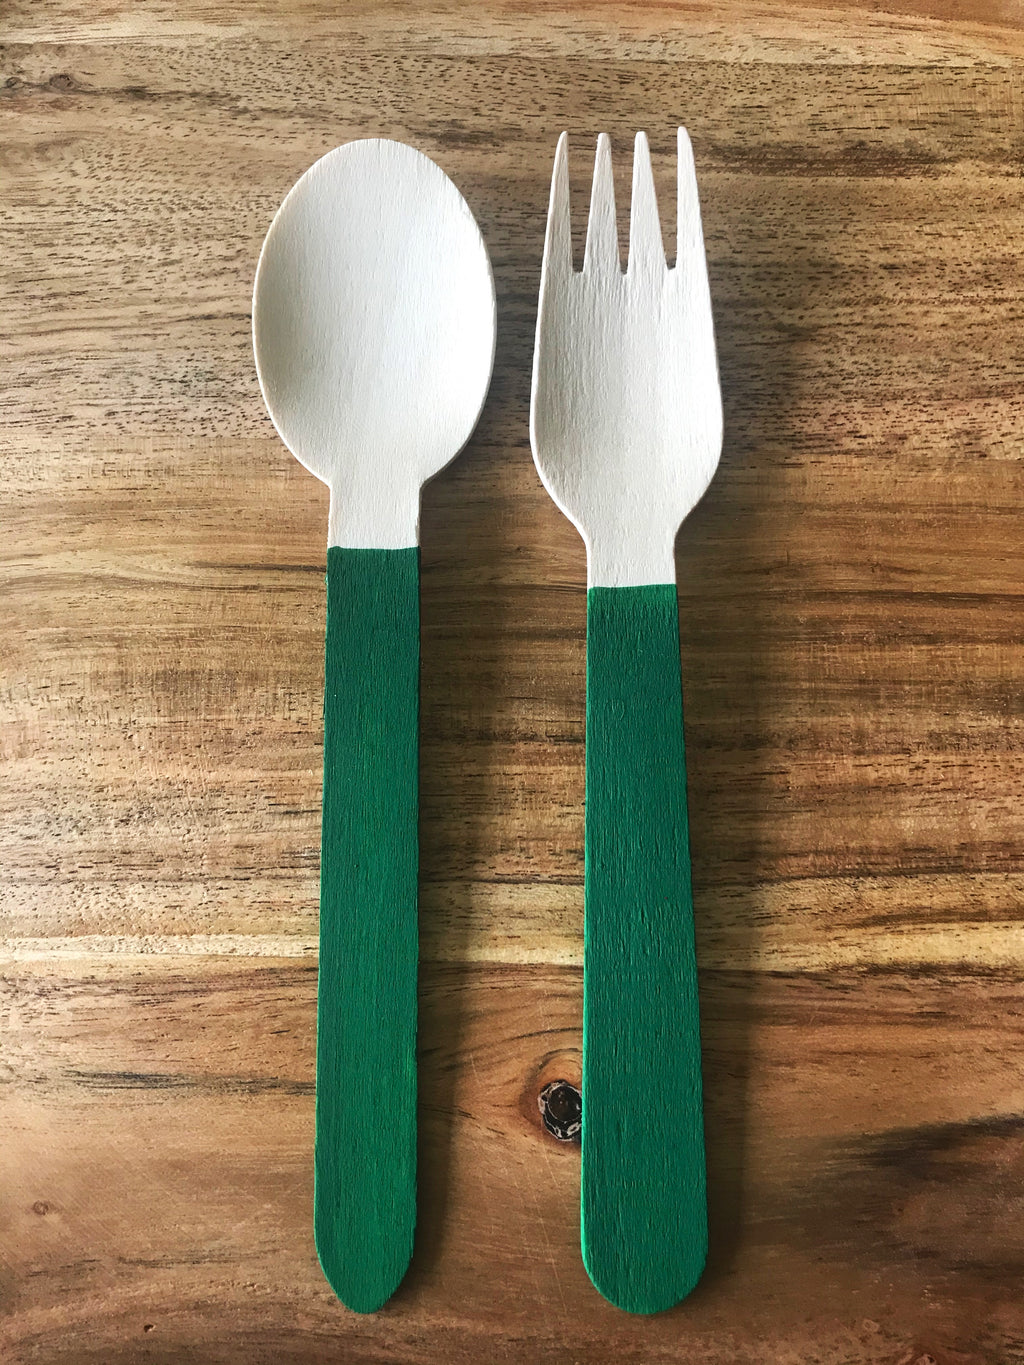 Green Forks and Spoons | Wooden Painted Forks and Spoons